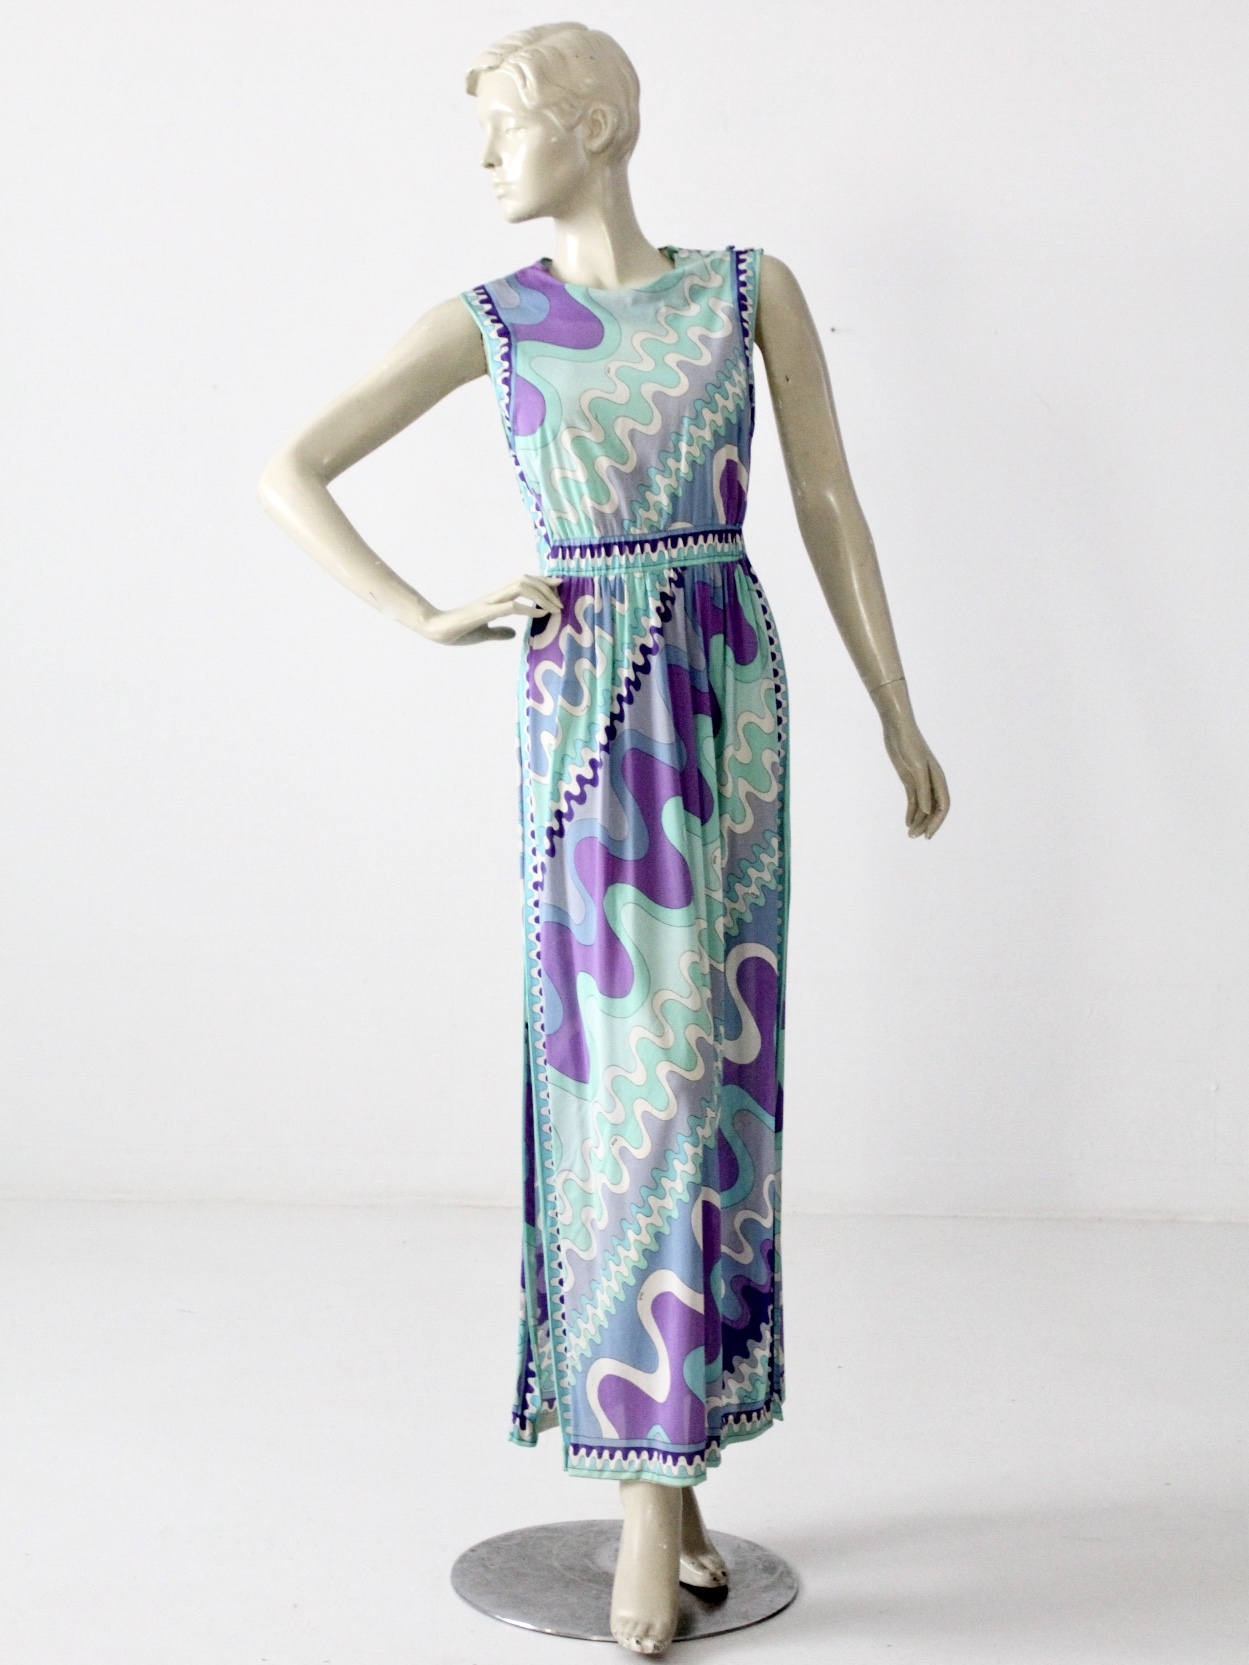 1960s Pucci Slip / Vintage EPFR Night Gown / Pucci Dress - Etsy